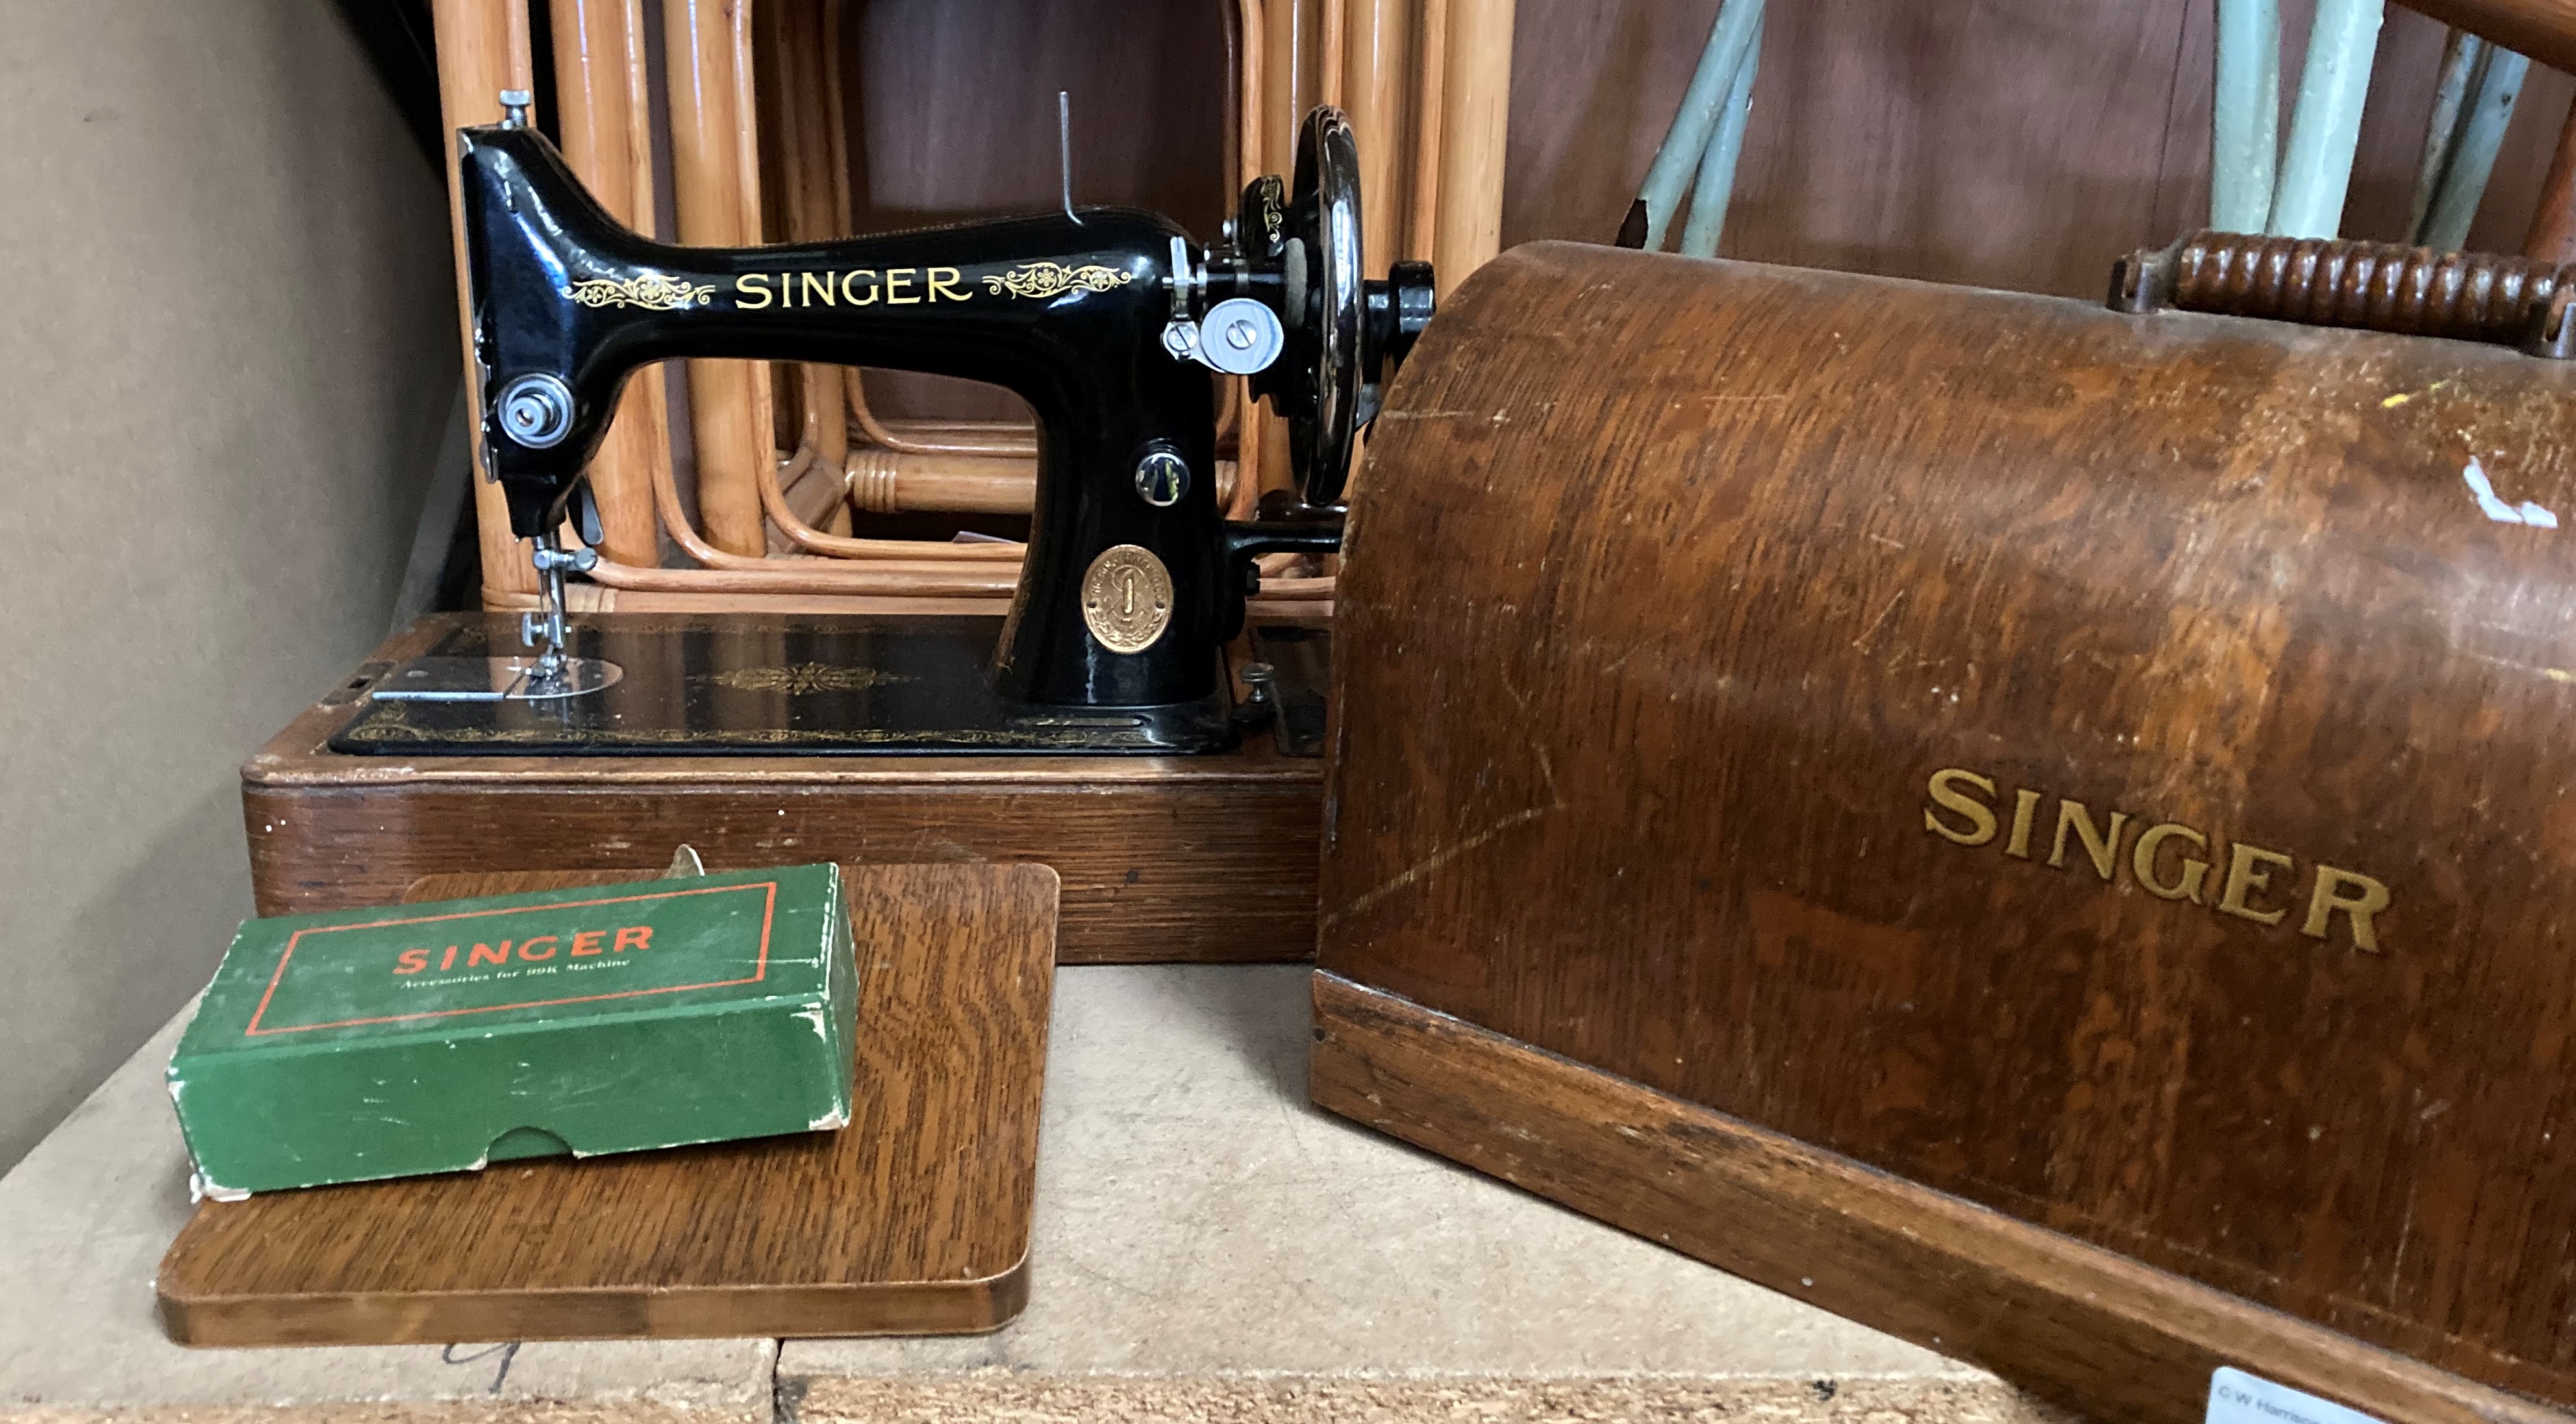 A Singer sewing machine in oak finish portable case complete with accessory pack for a Singer 99K